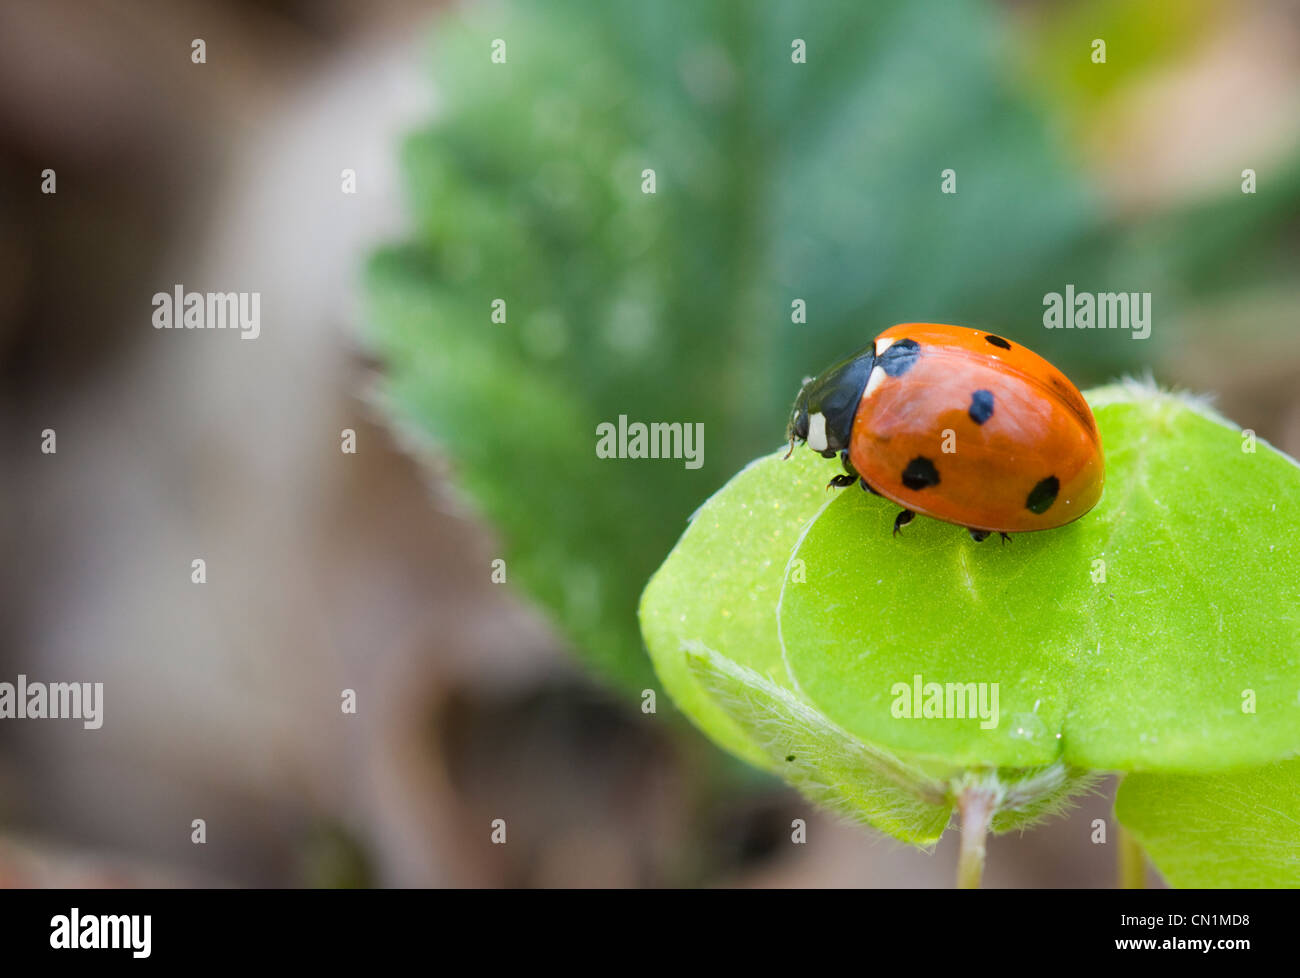 Seven-spotted ladybug, Coccinella septempunctata, ready to fly. Stock Photo